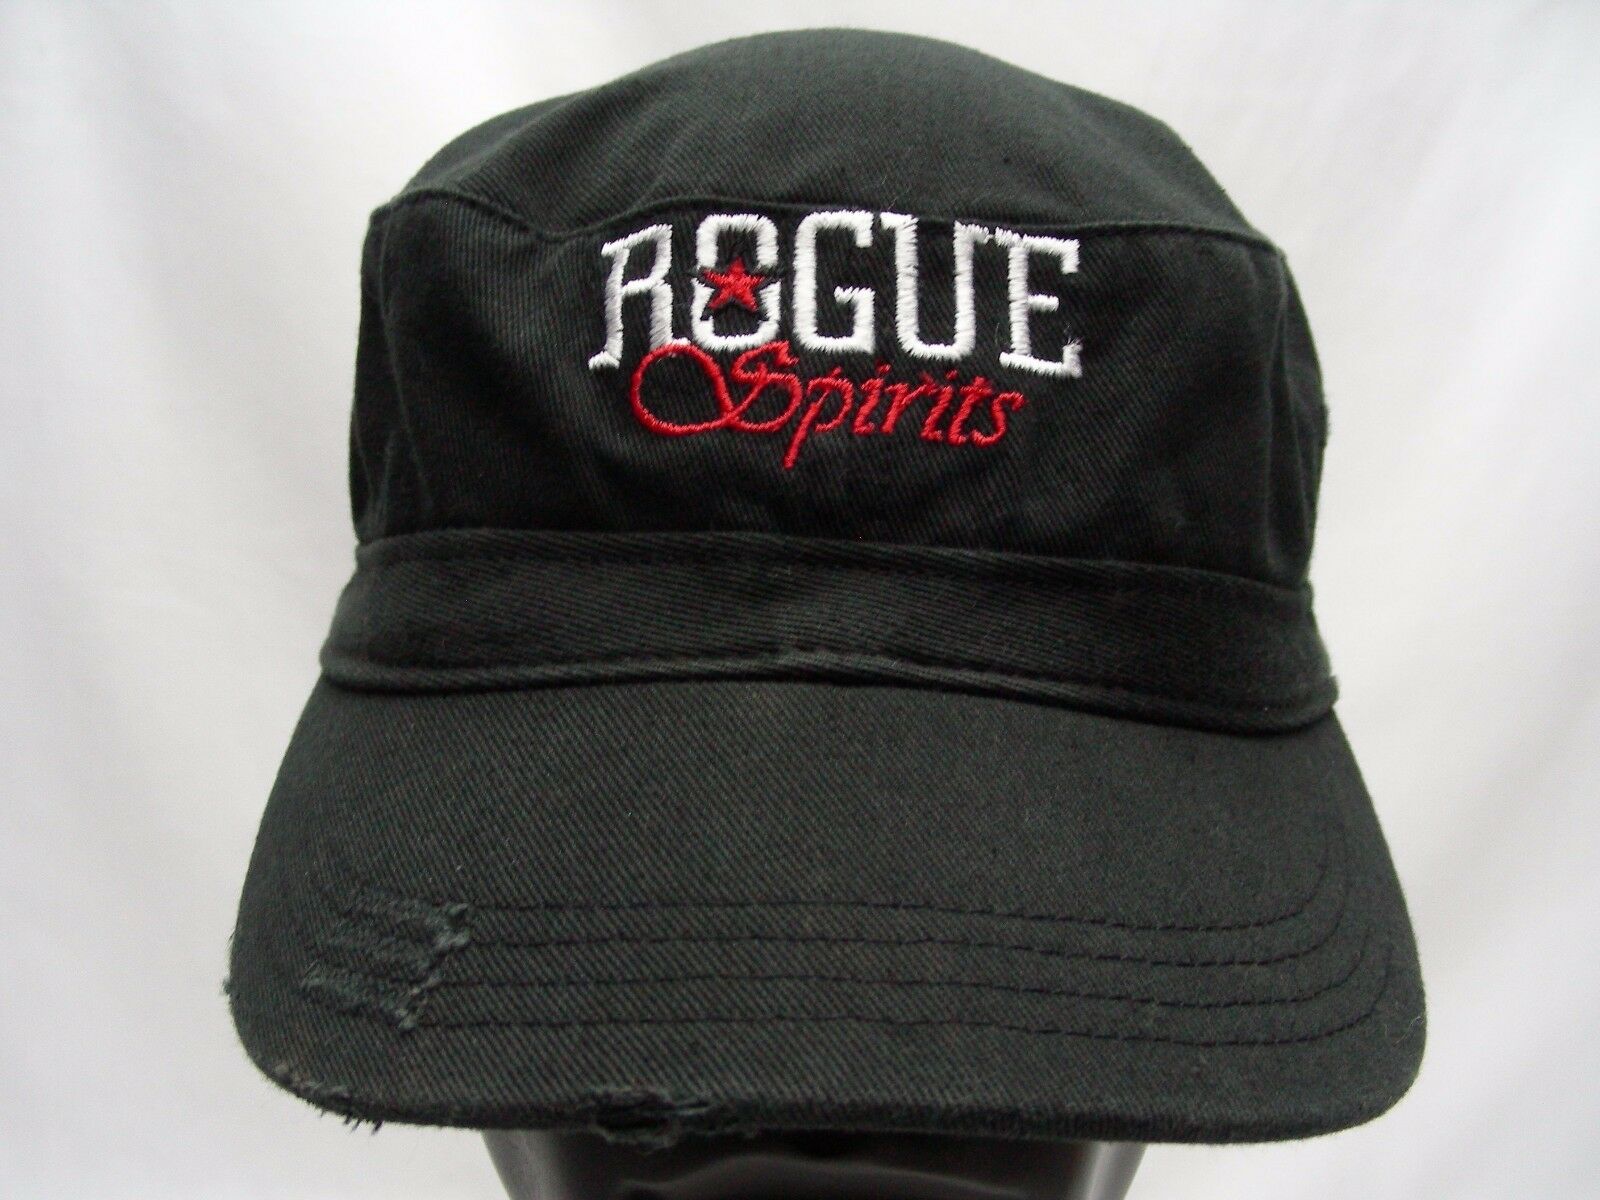 Rogue Spirits - Distressed Style - Adjustable Cadet Style Cap Hat!